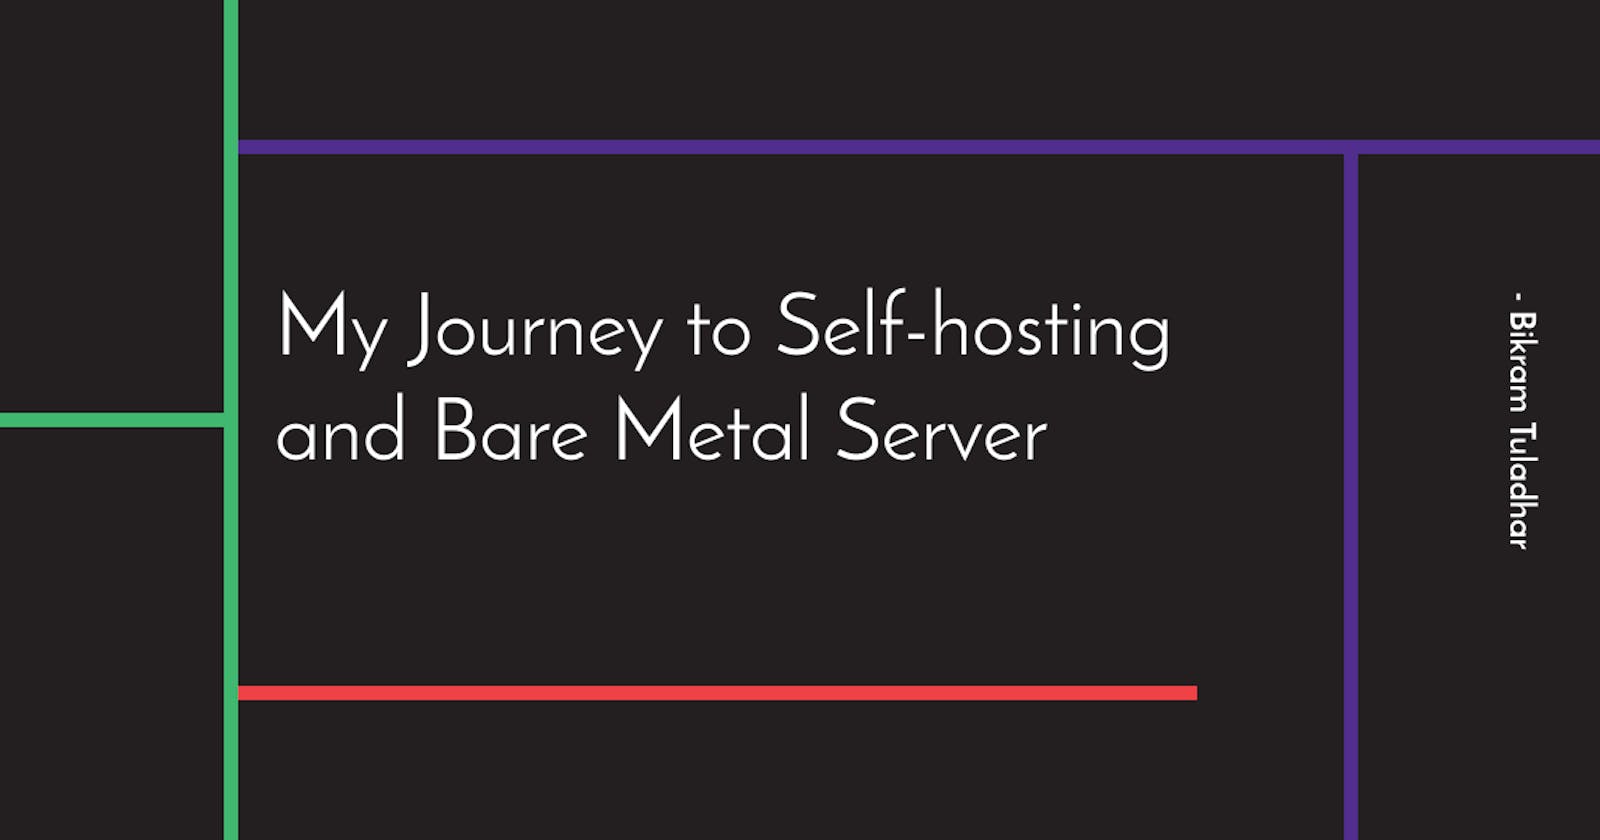 My Journey to Self-hosting and Bare Metal Server